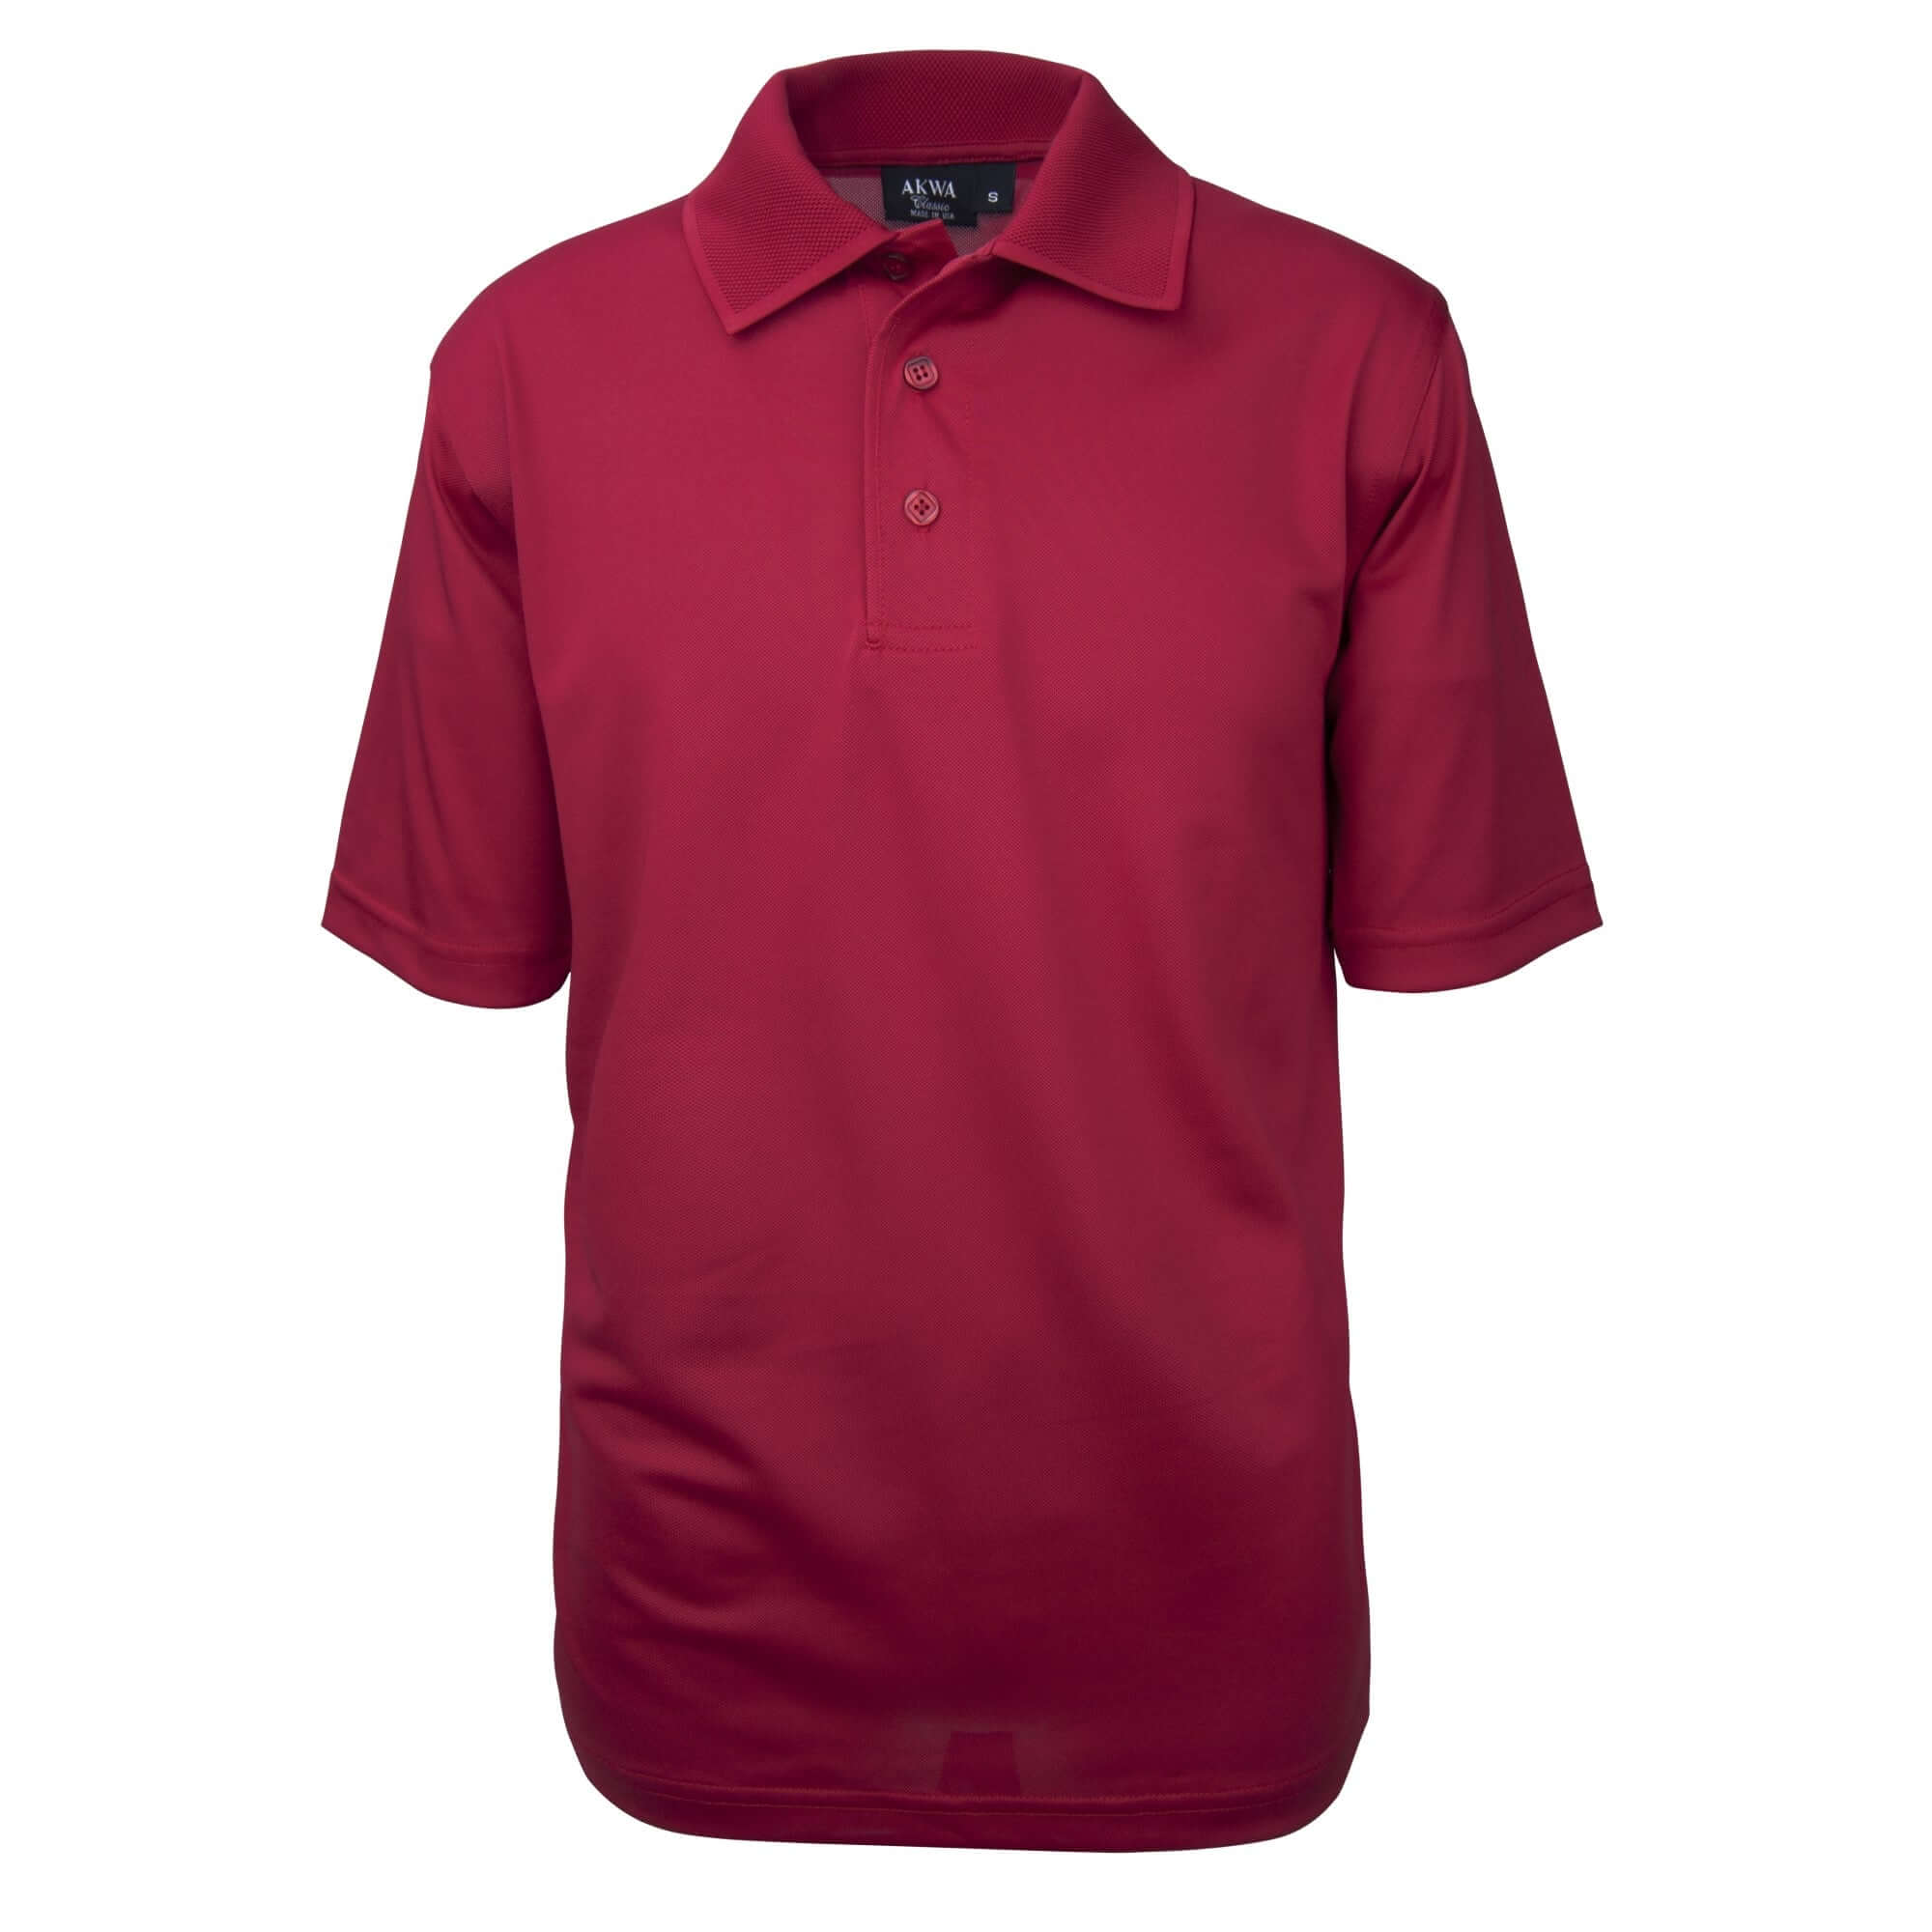 Men's Made in USA Tech Polo Shirt color_red - the flag shirt